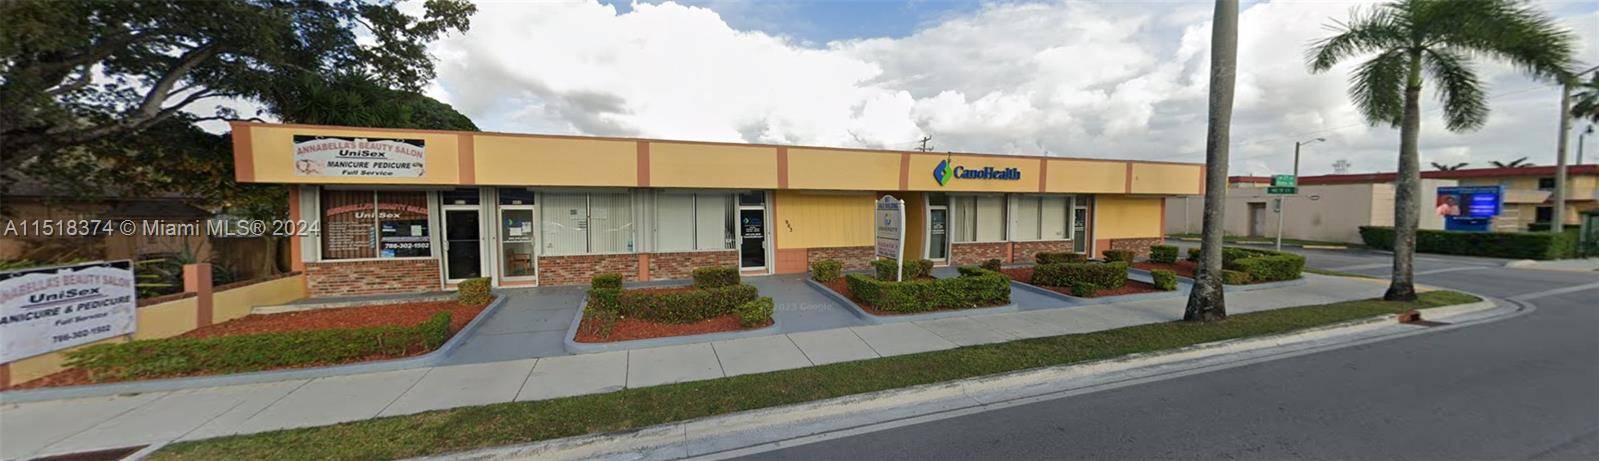 Commercial opportunity ! This free standing building, zoned B 1 commercial uses.